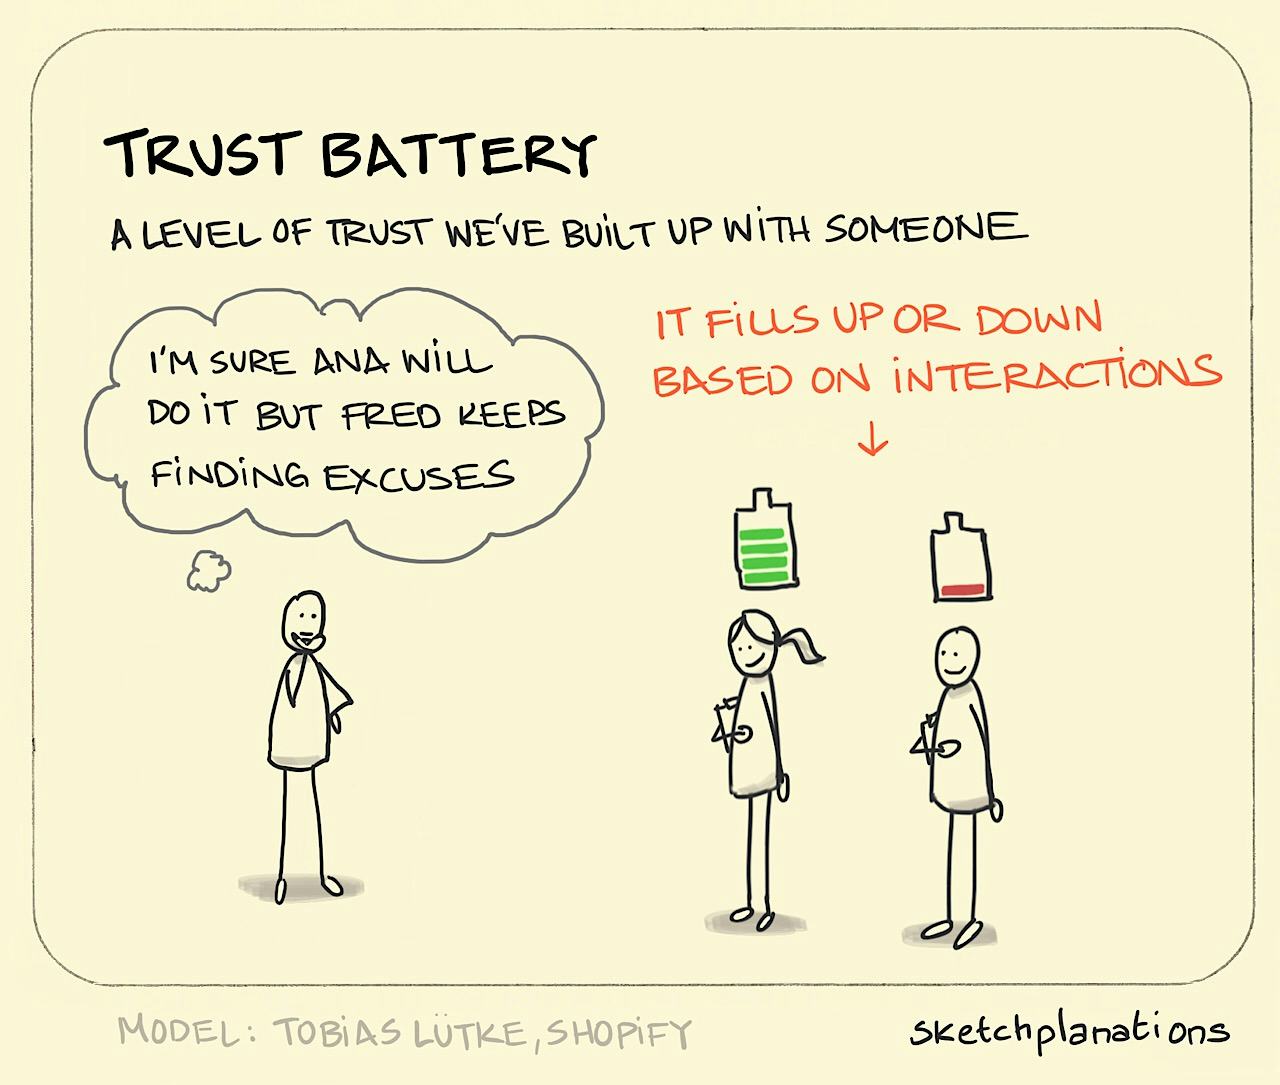 The trust battery illustration with a manager considering 2 employees based on their past interactions